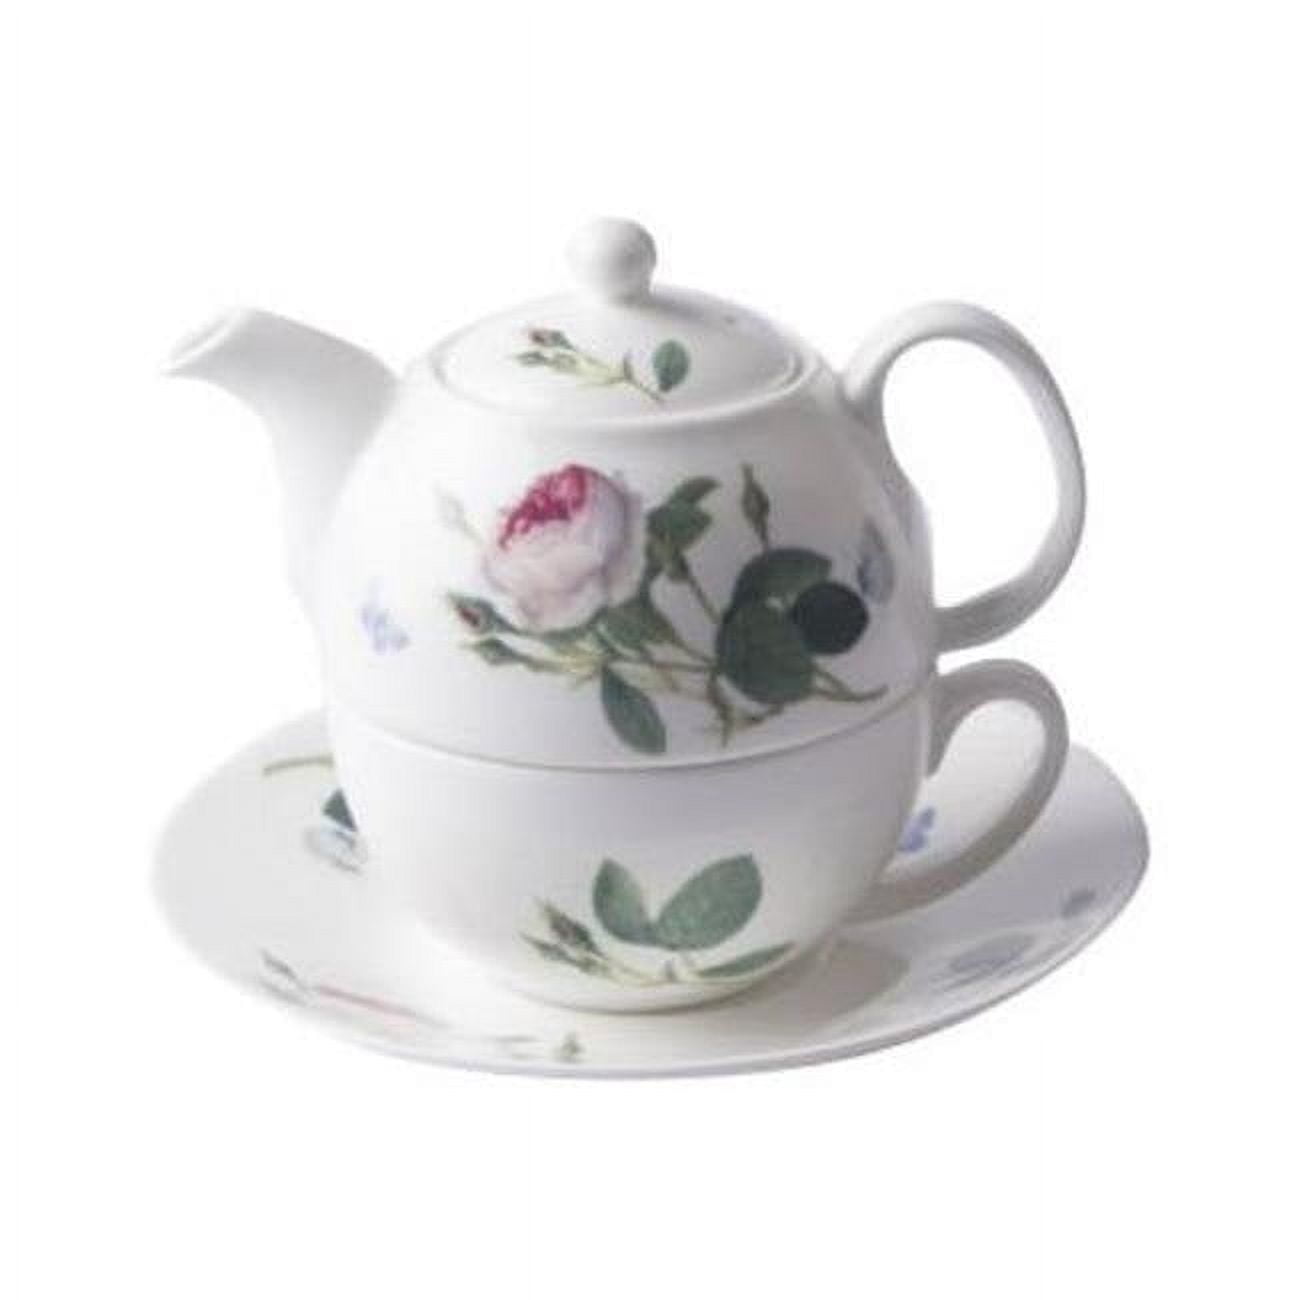 Er30103 90 Mm Palace Garden Tea For One Teapot With Tea Cup & Saucer, Multi Color